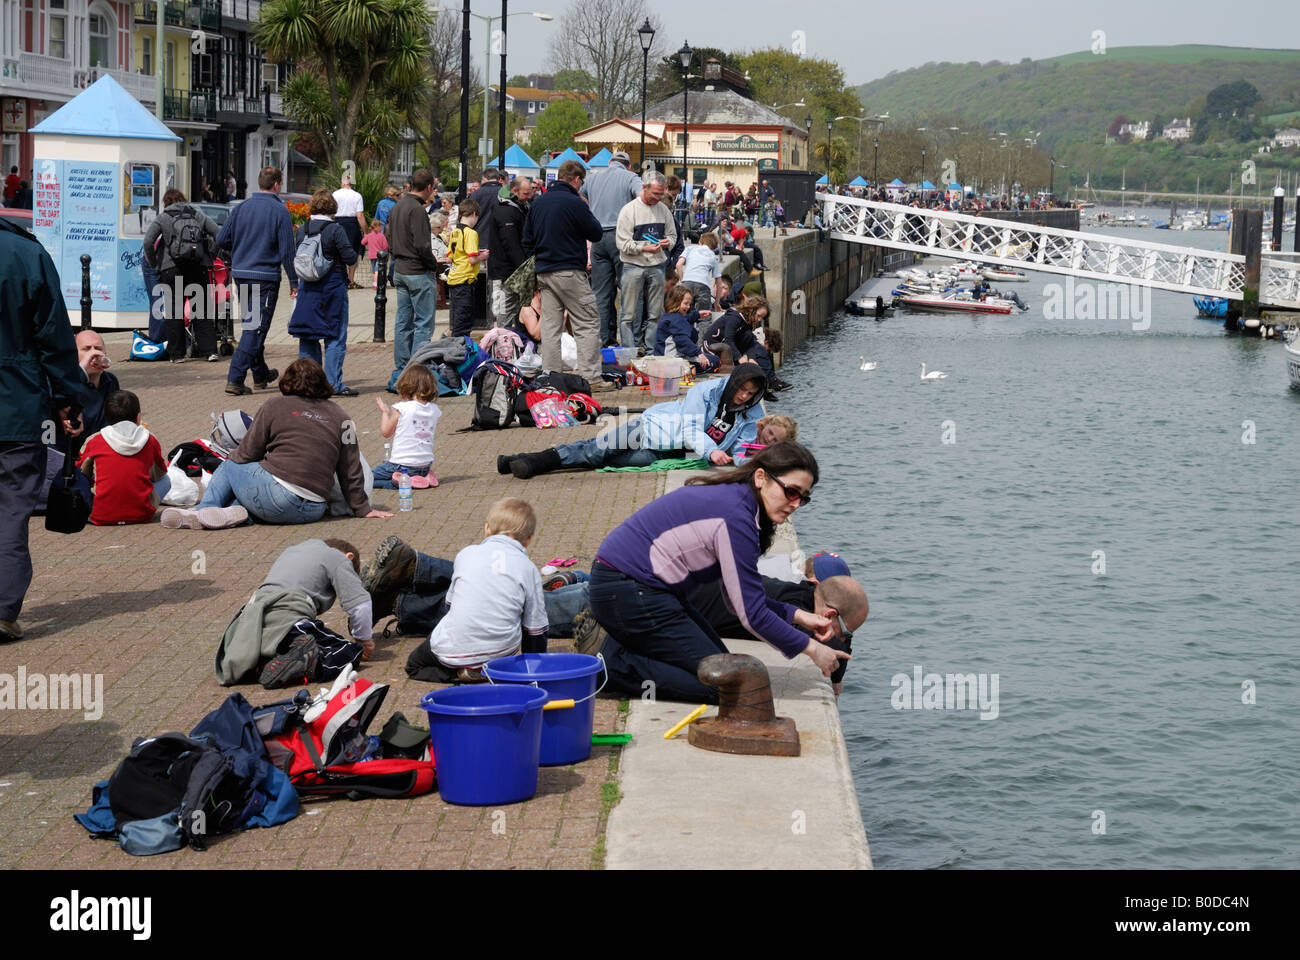 People fishing for crabs in Dartmouth, Devon, UK Stock Photo